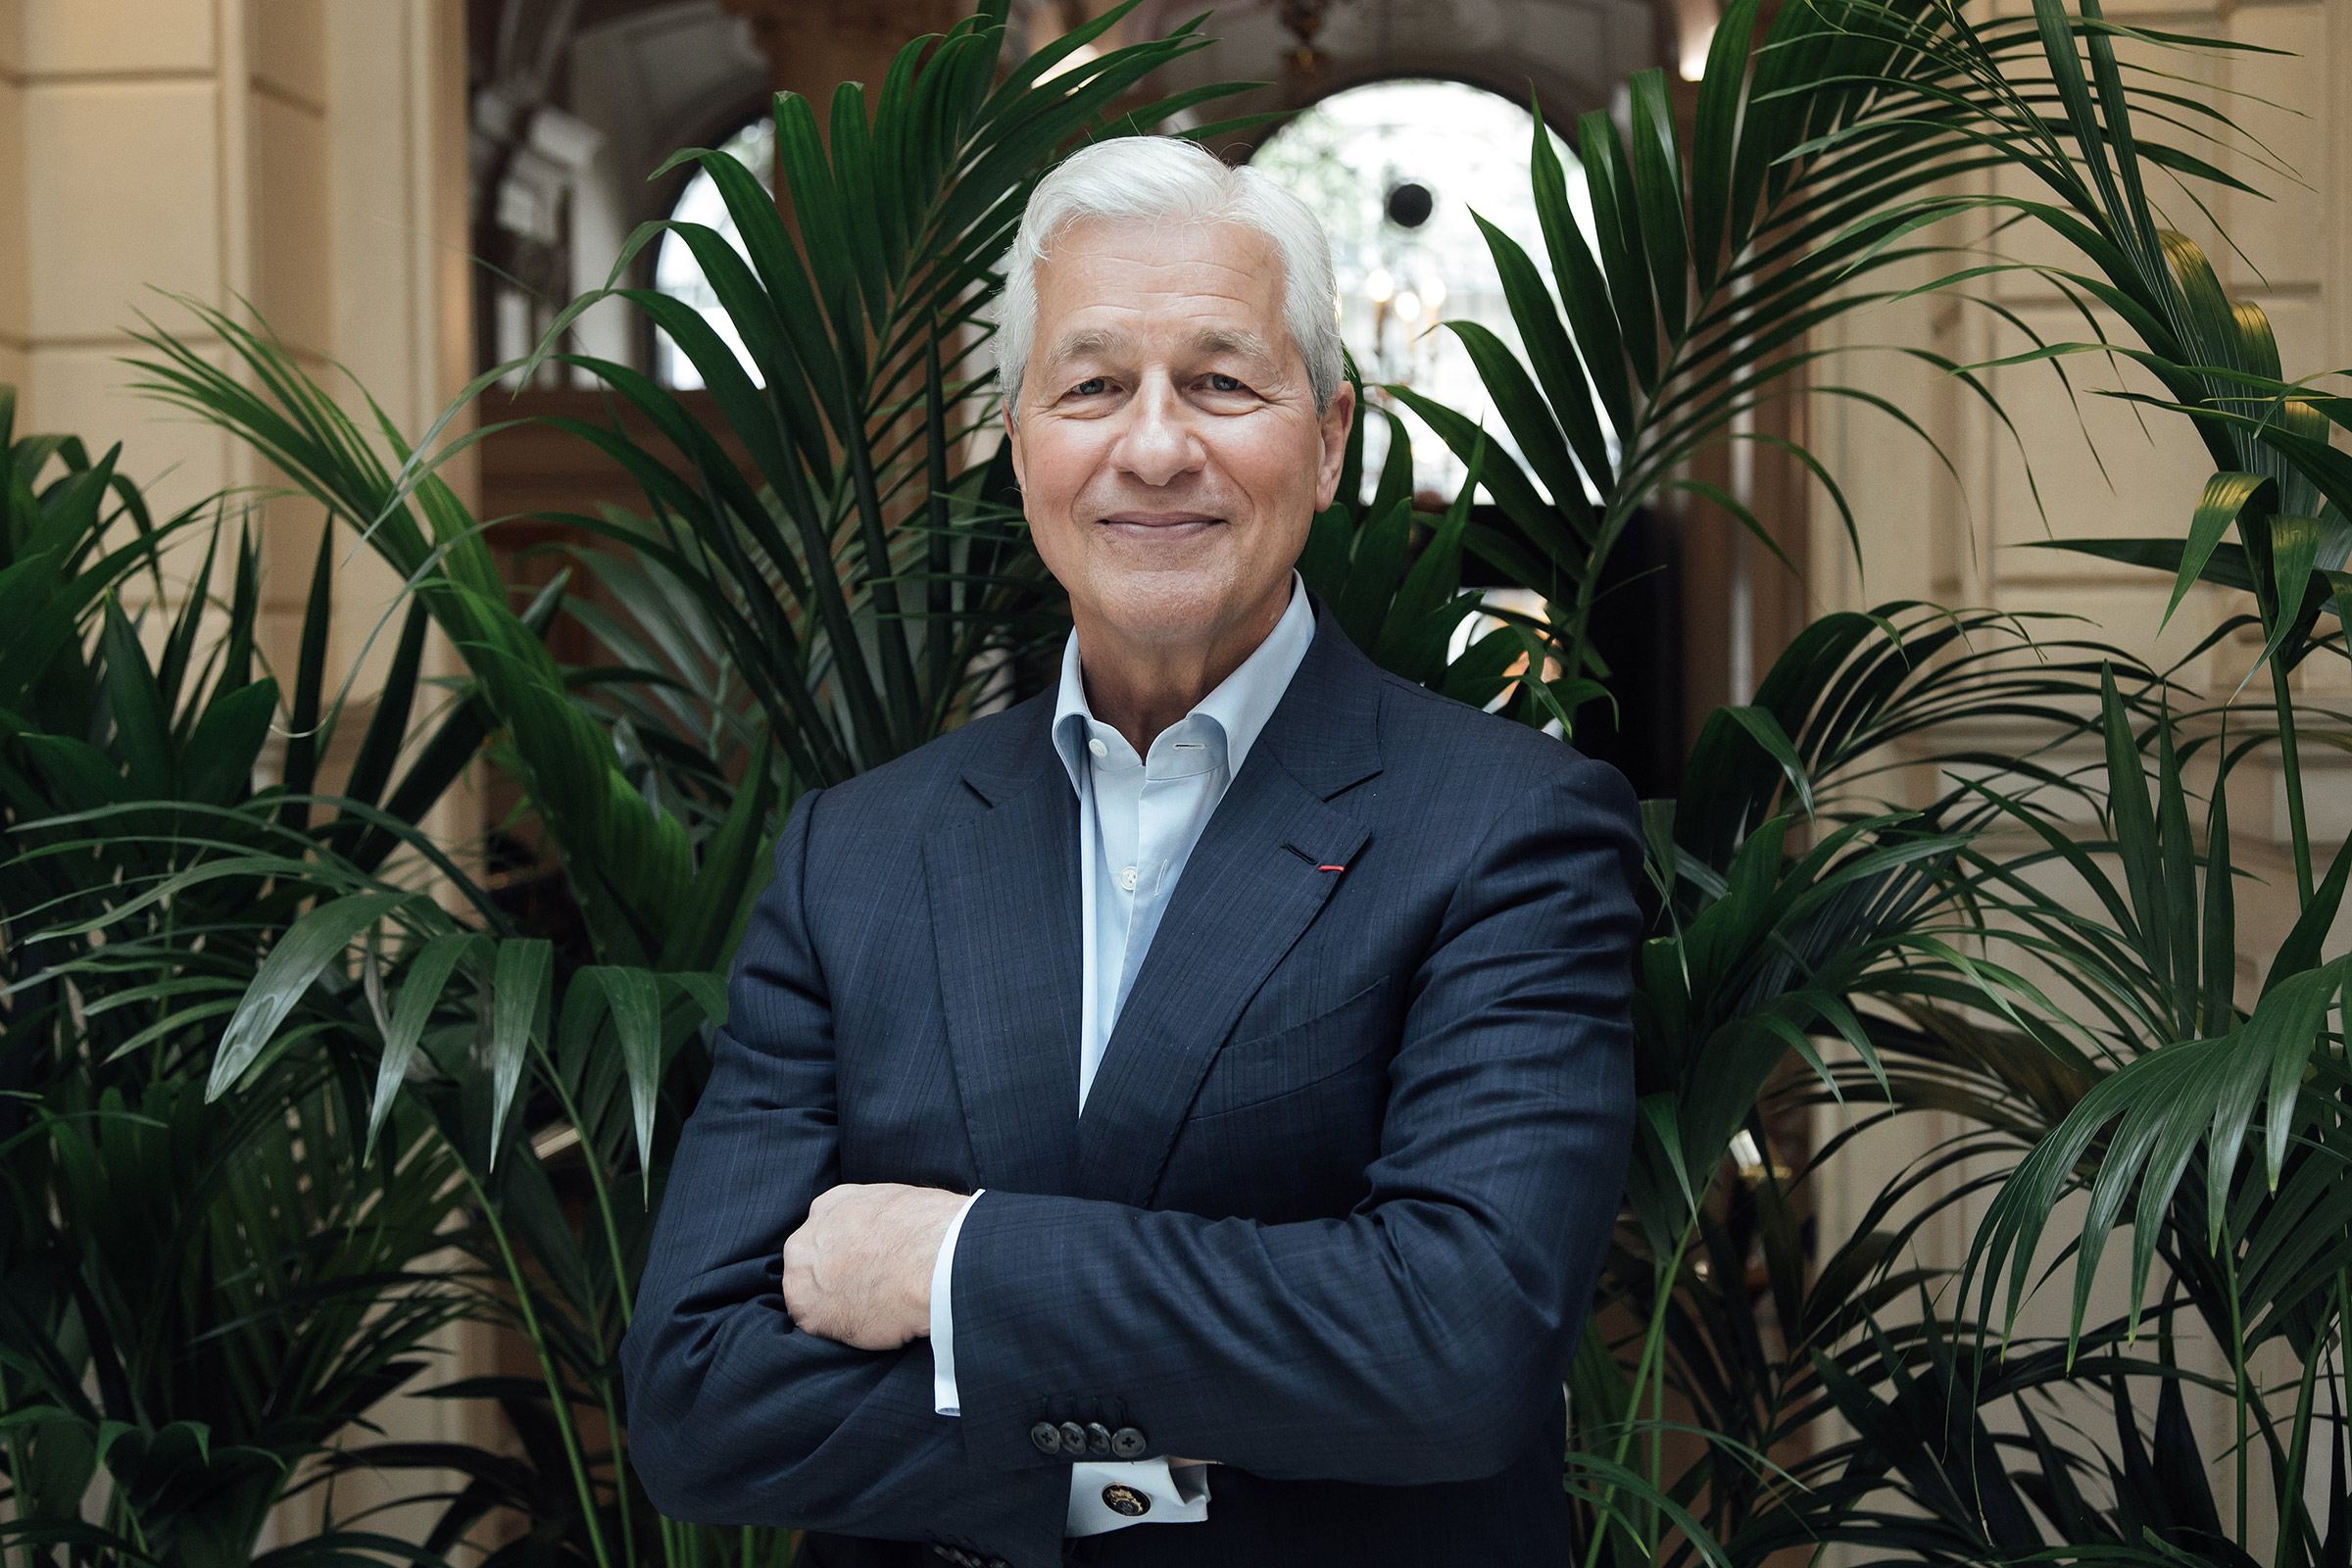 Jamie Dimon, billionaire and chief executive officer of JPMorgan Chase &amp; Co., following a Bloomberg Television interview at the JPMorgan Global Markets Conference in Paris, France, on Thursday, May 11, 2023. (Cyril Marcilhacy—Bloomberg/Getty Images)